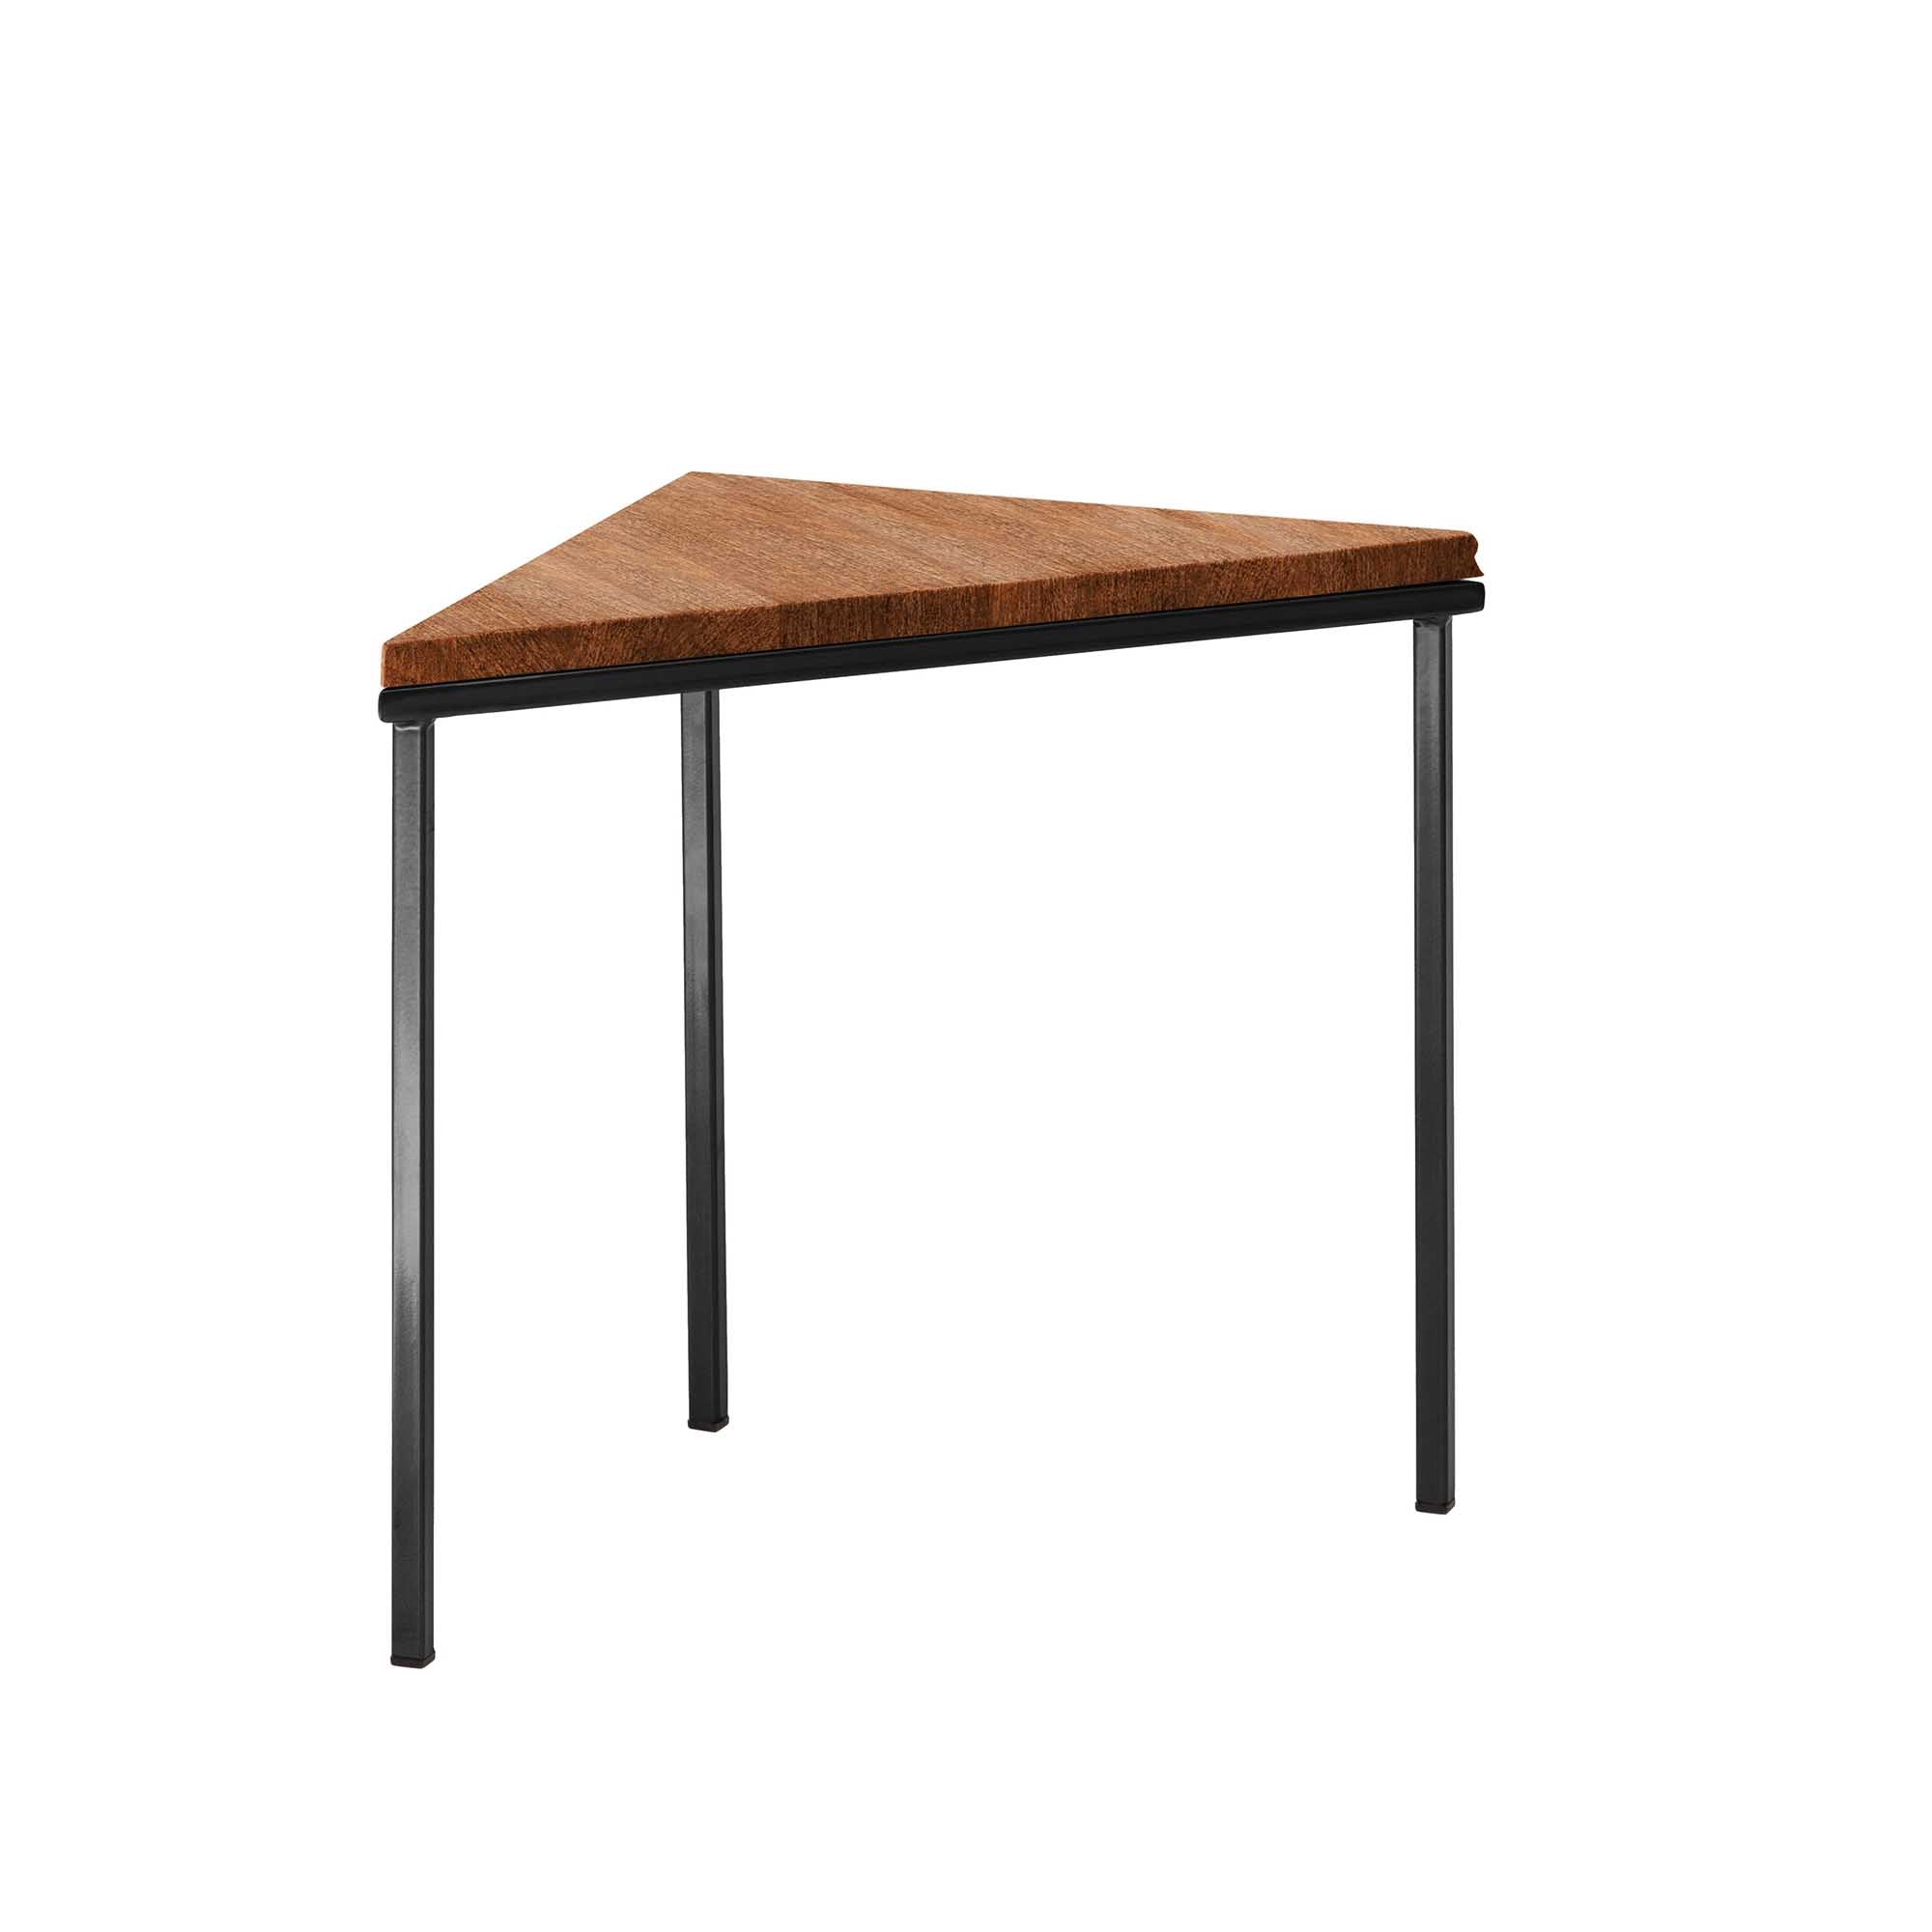 Tripod Table, Beech Wood, Walnut Colour black frame, front view